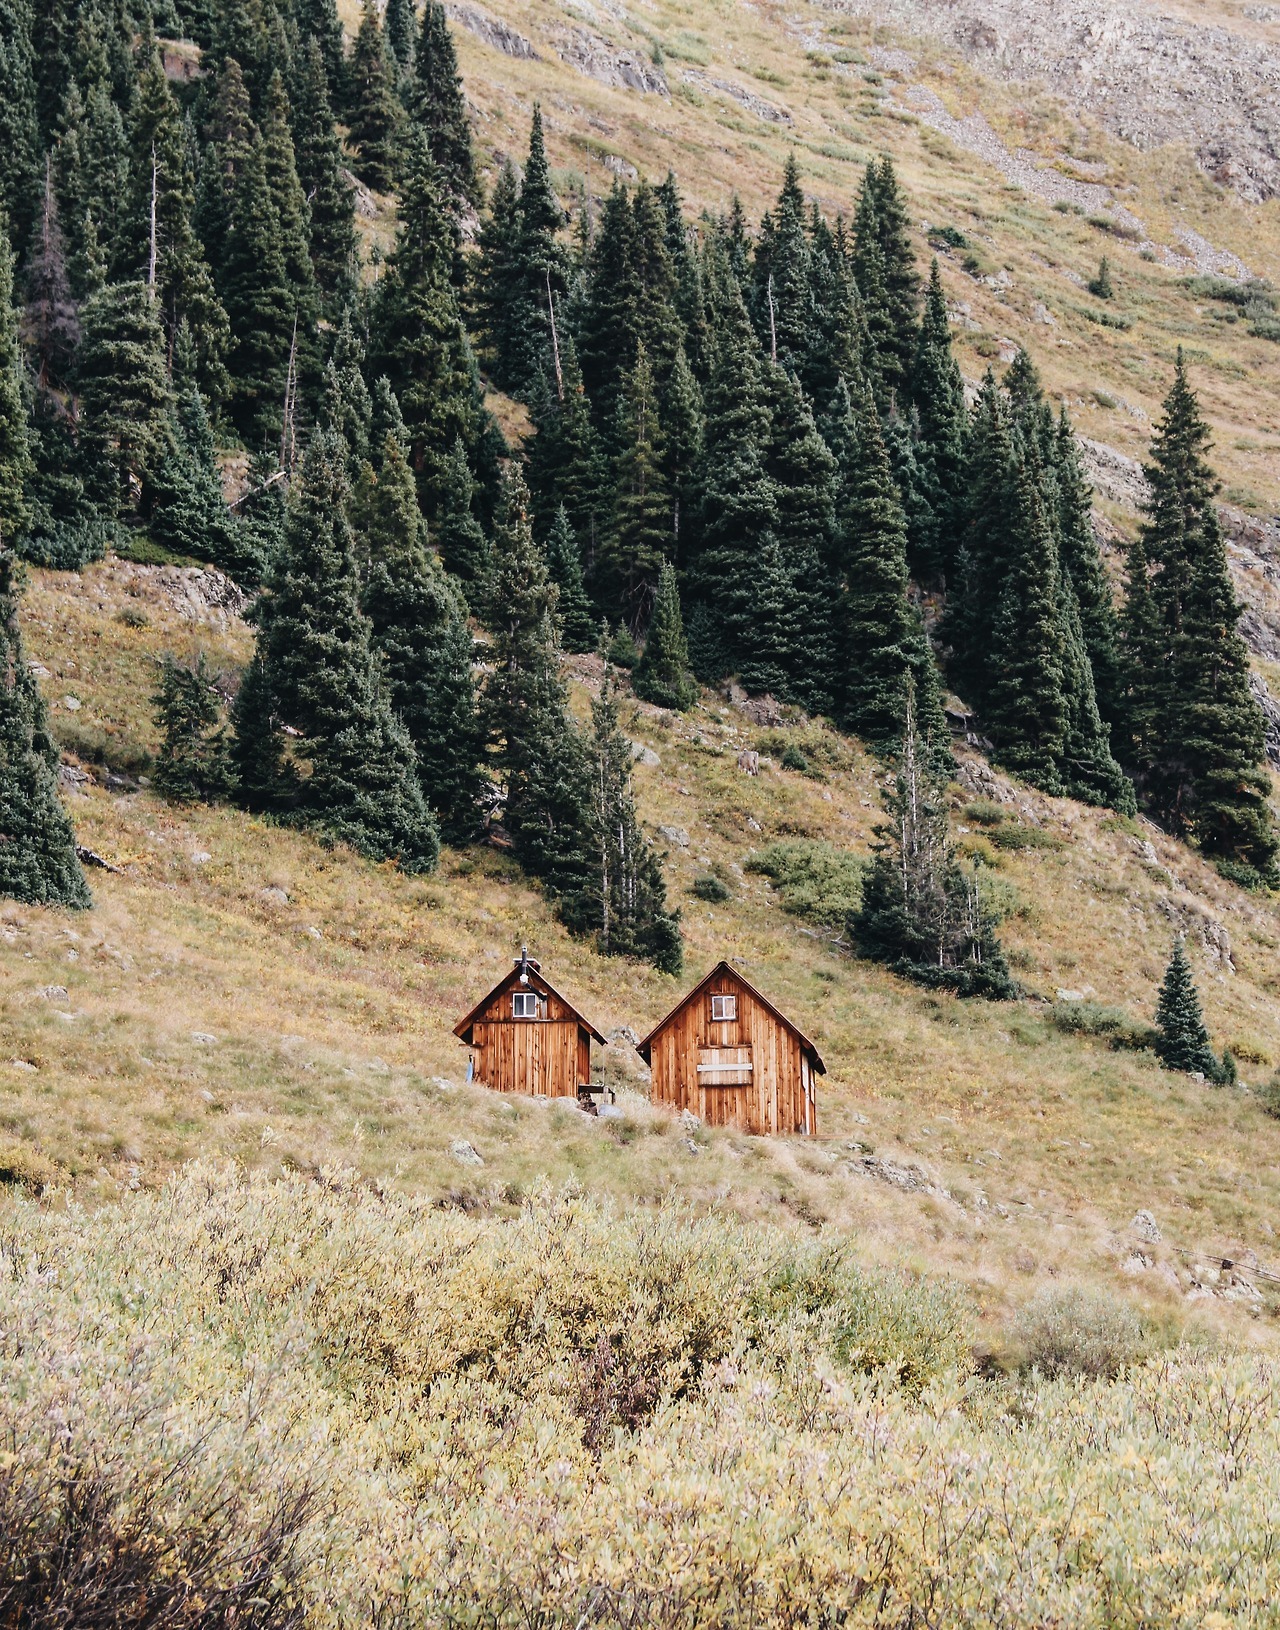 Two-part cabin built next to the ghost town of Animas Forks, Colorado
Submitted by Olivia Witt / @oliviaawitt